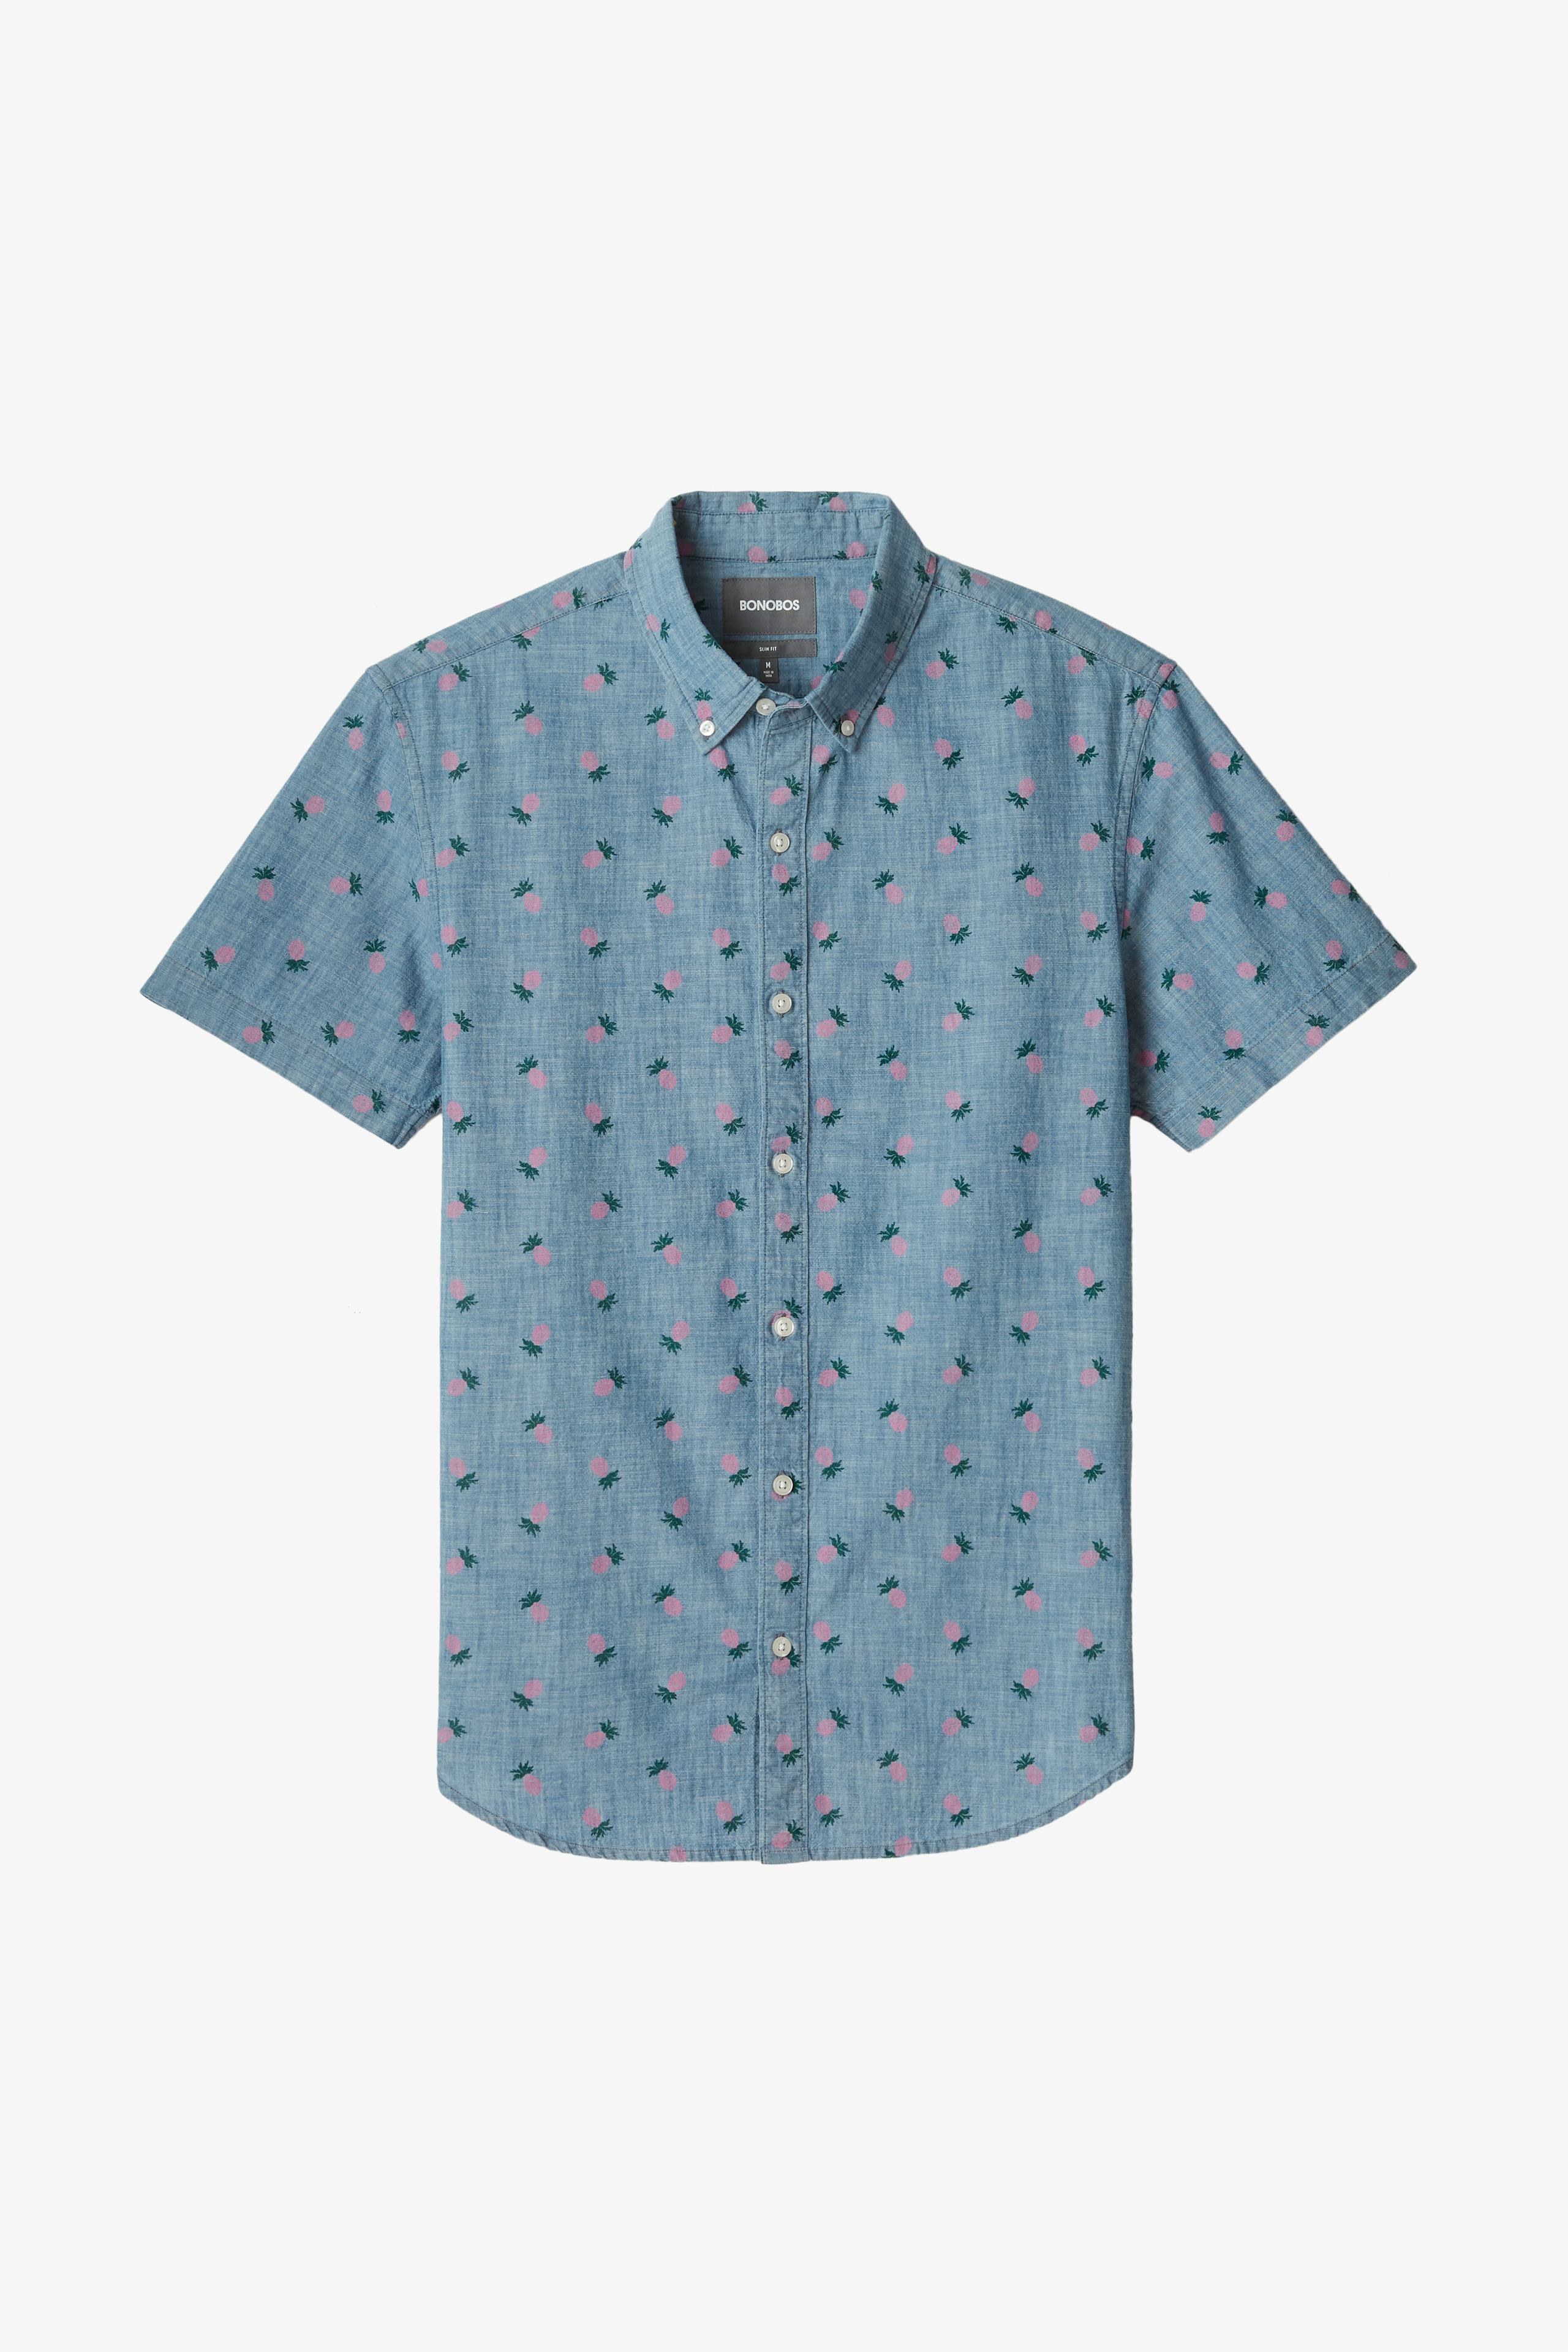 Riviera Short Sleeve Shirt Extended Sizes